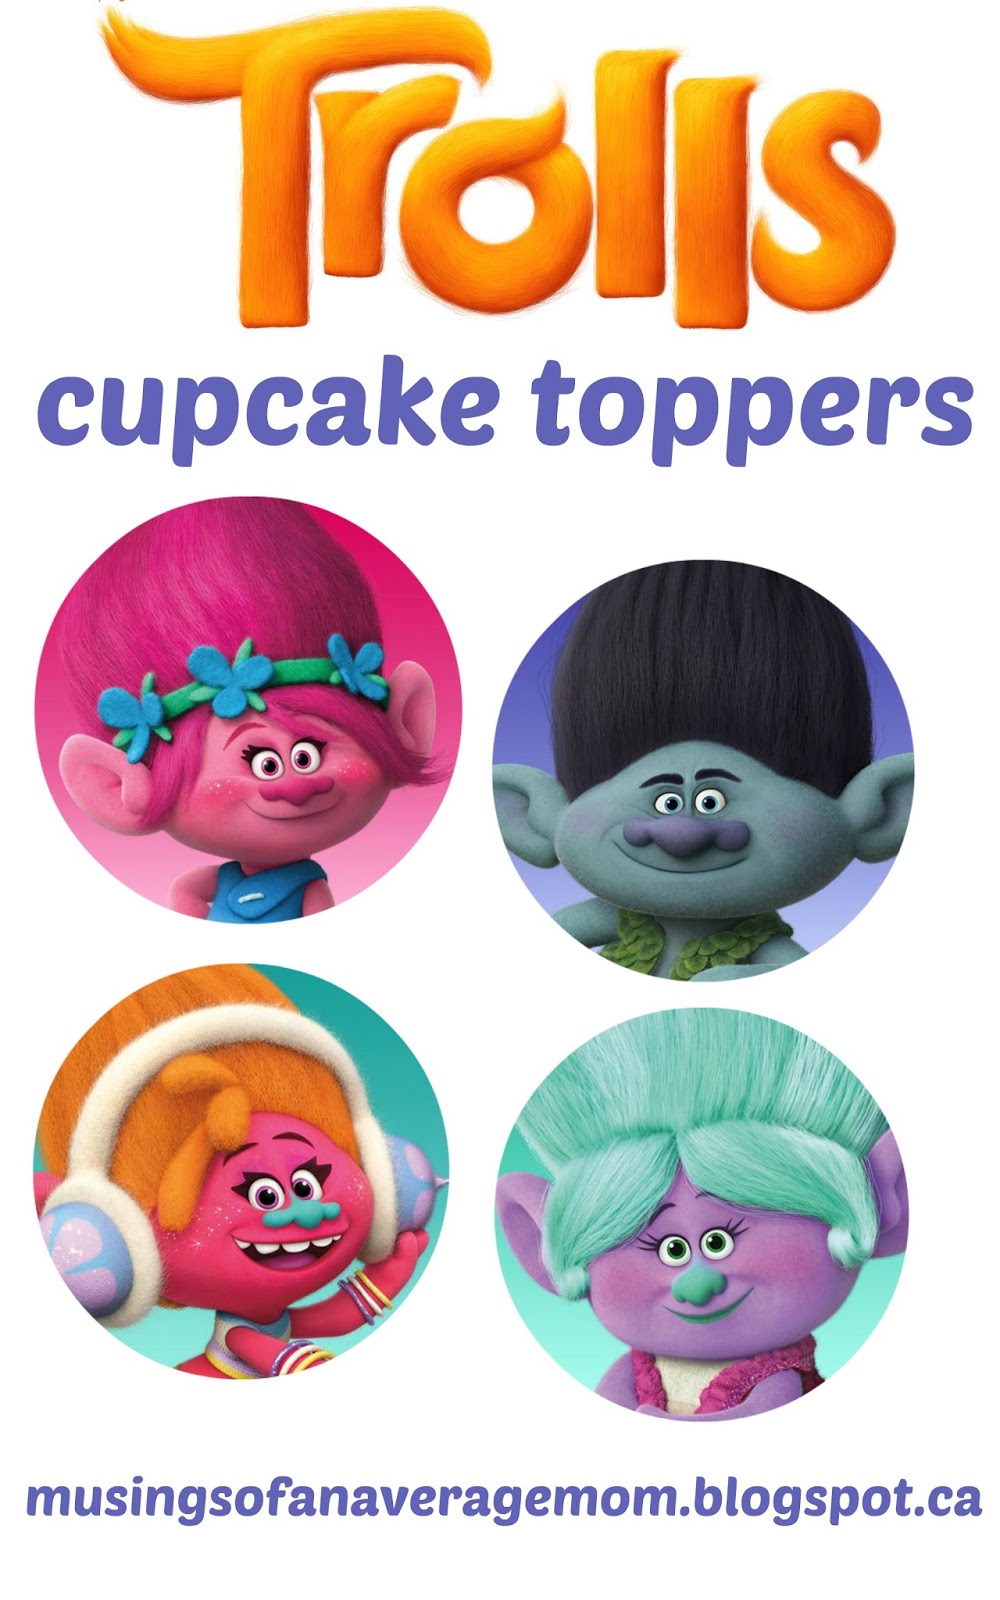 musings-of-an-average-mom-trolls-cupcake-toppers